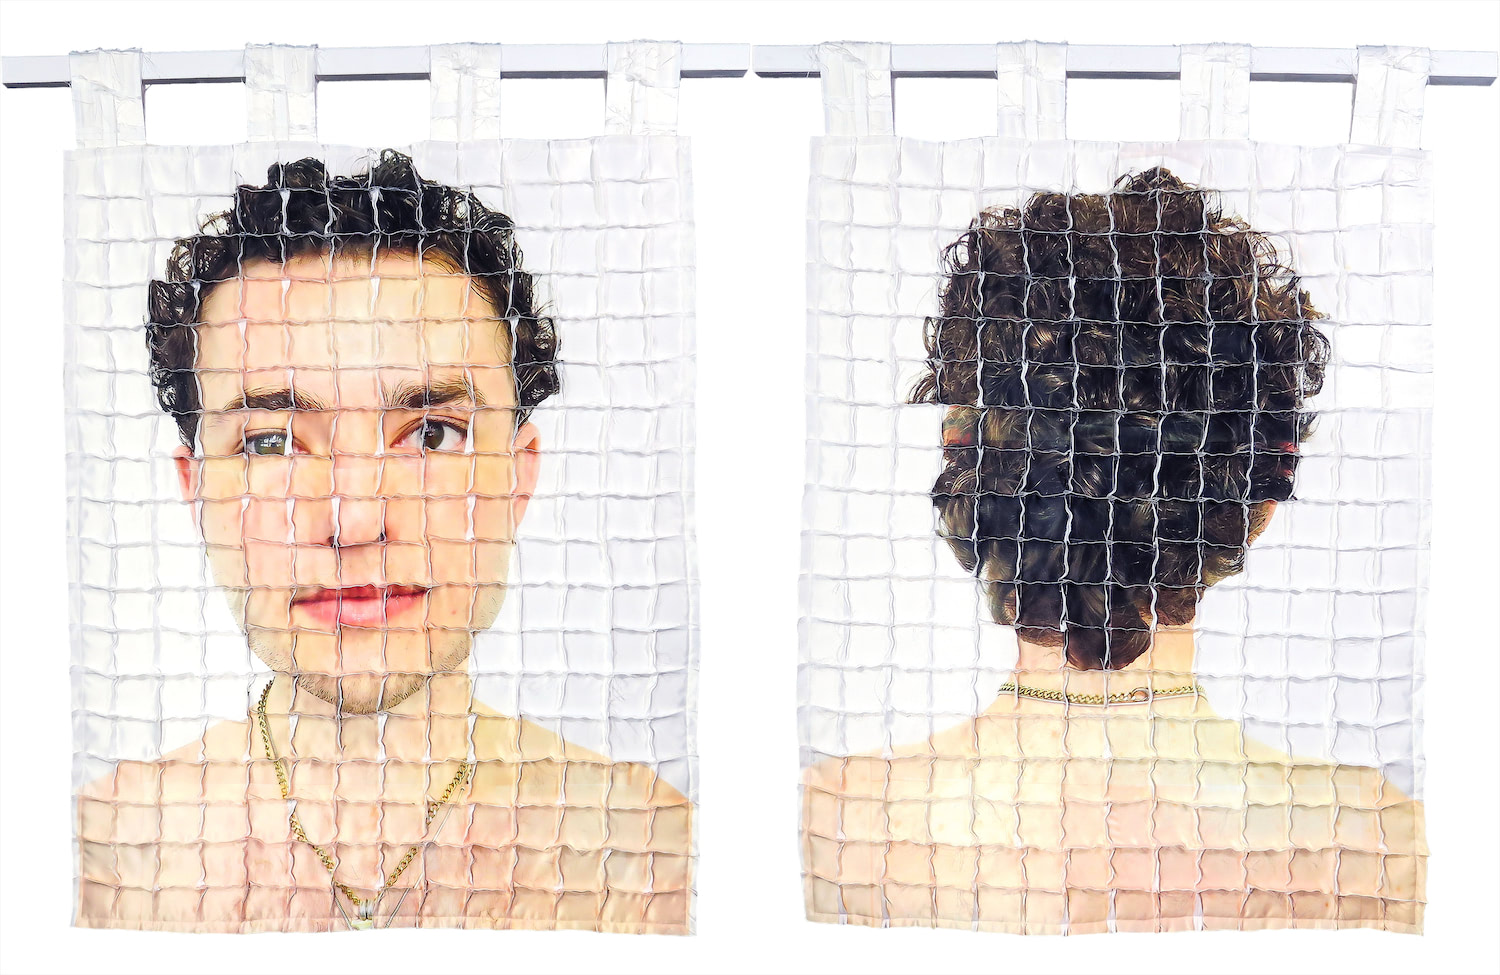 Left: Front side of quilt #4 with the artist's face distorted by a gridded system of seams that are sticking out. Right: Back side of quilt #4 with the back of the artist's head and shoulders distorted by a gridded system of seams that are sticking out.